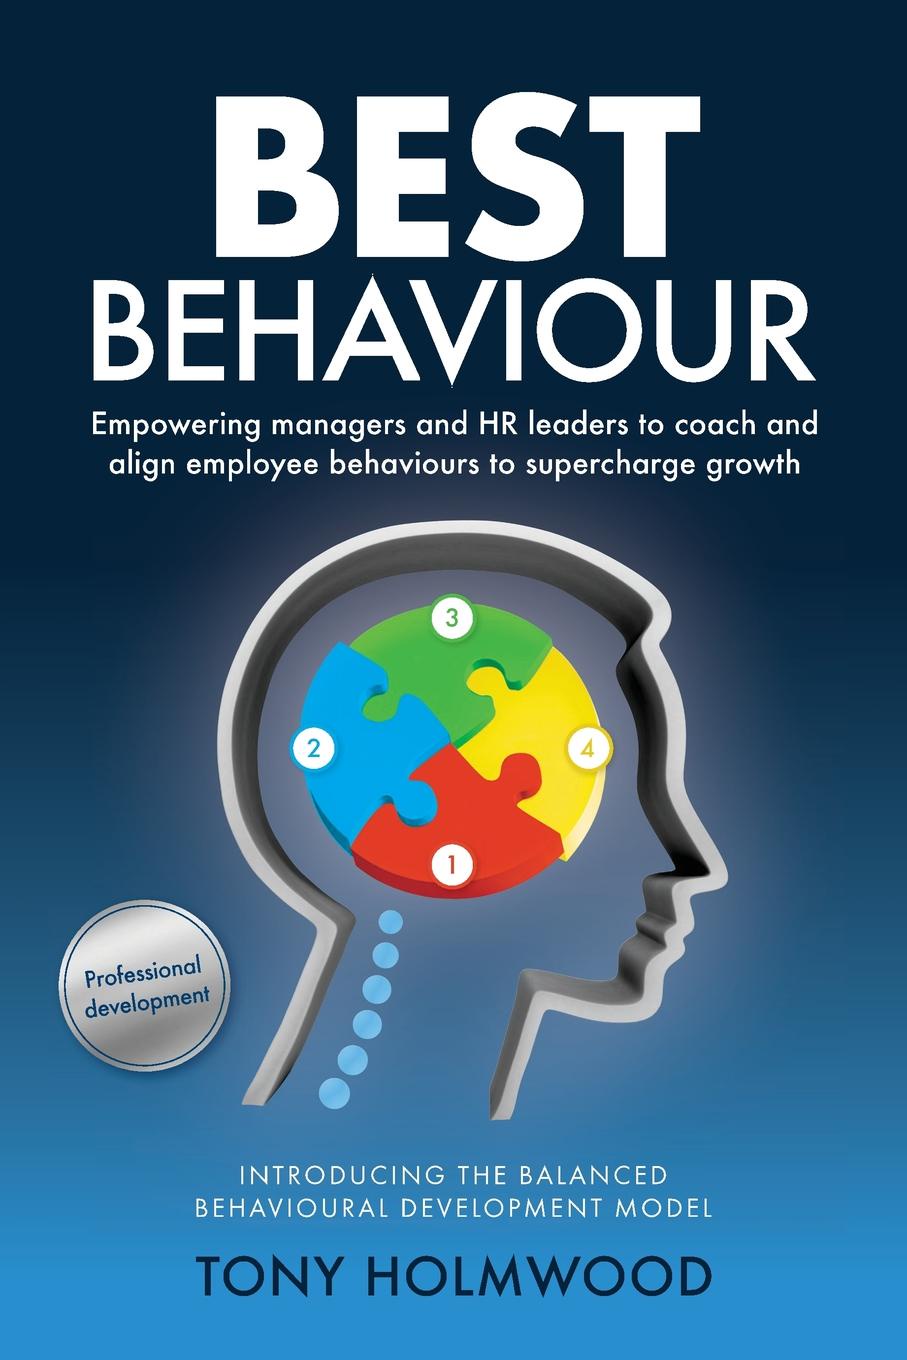 Best Behaviour. Empowering managers and HR leaders to coach and align employee behaviours to supercharge growth